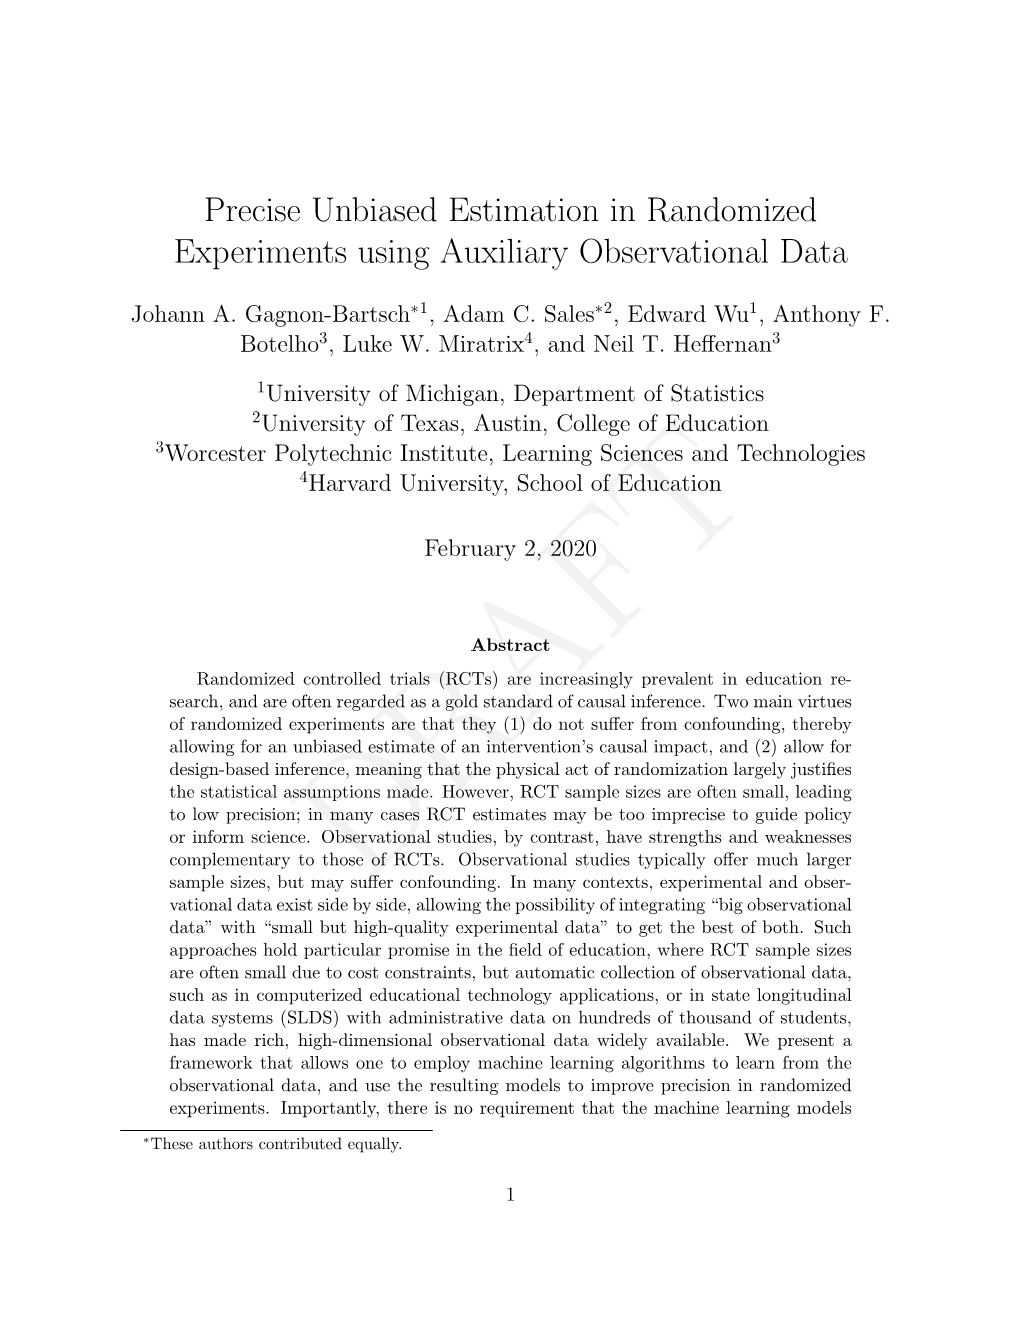 Precise Unbiased Estimation in Randomized Experiments Using Auxiliary Observational Data